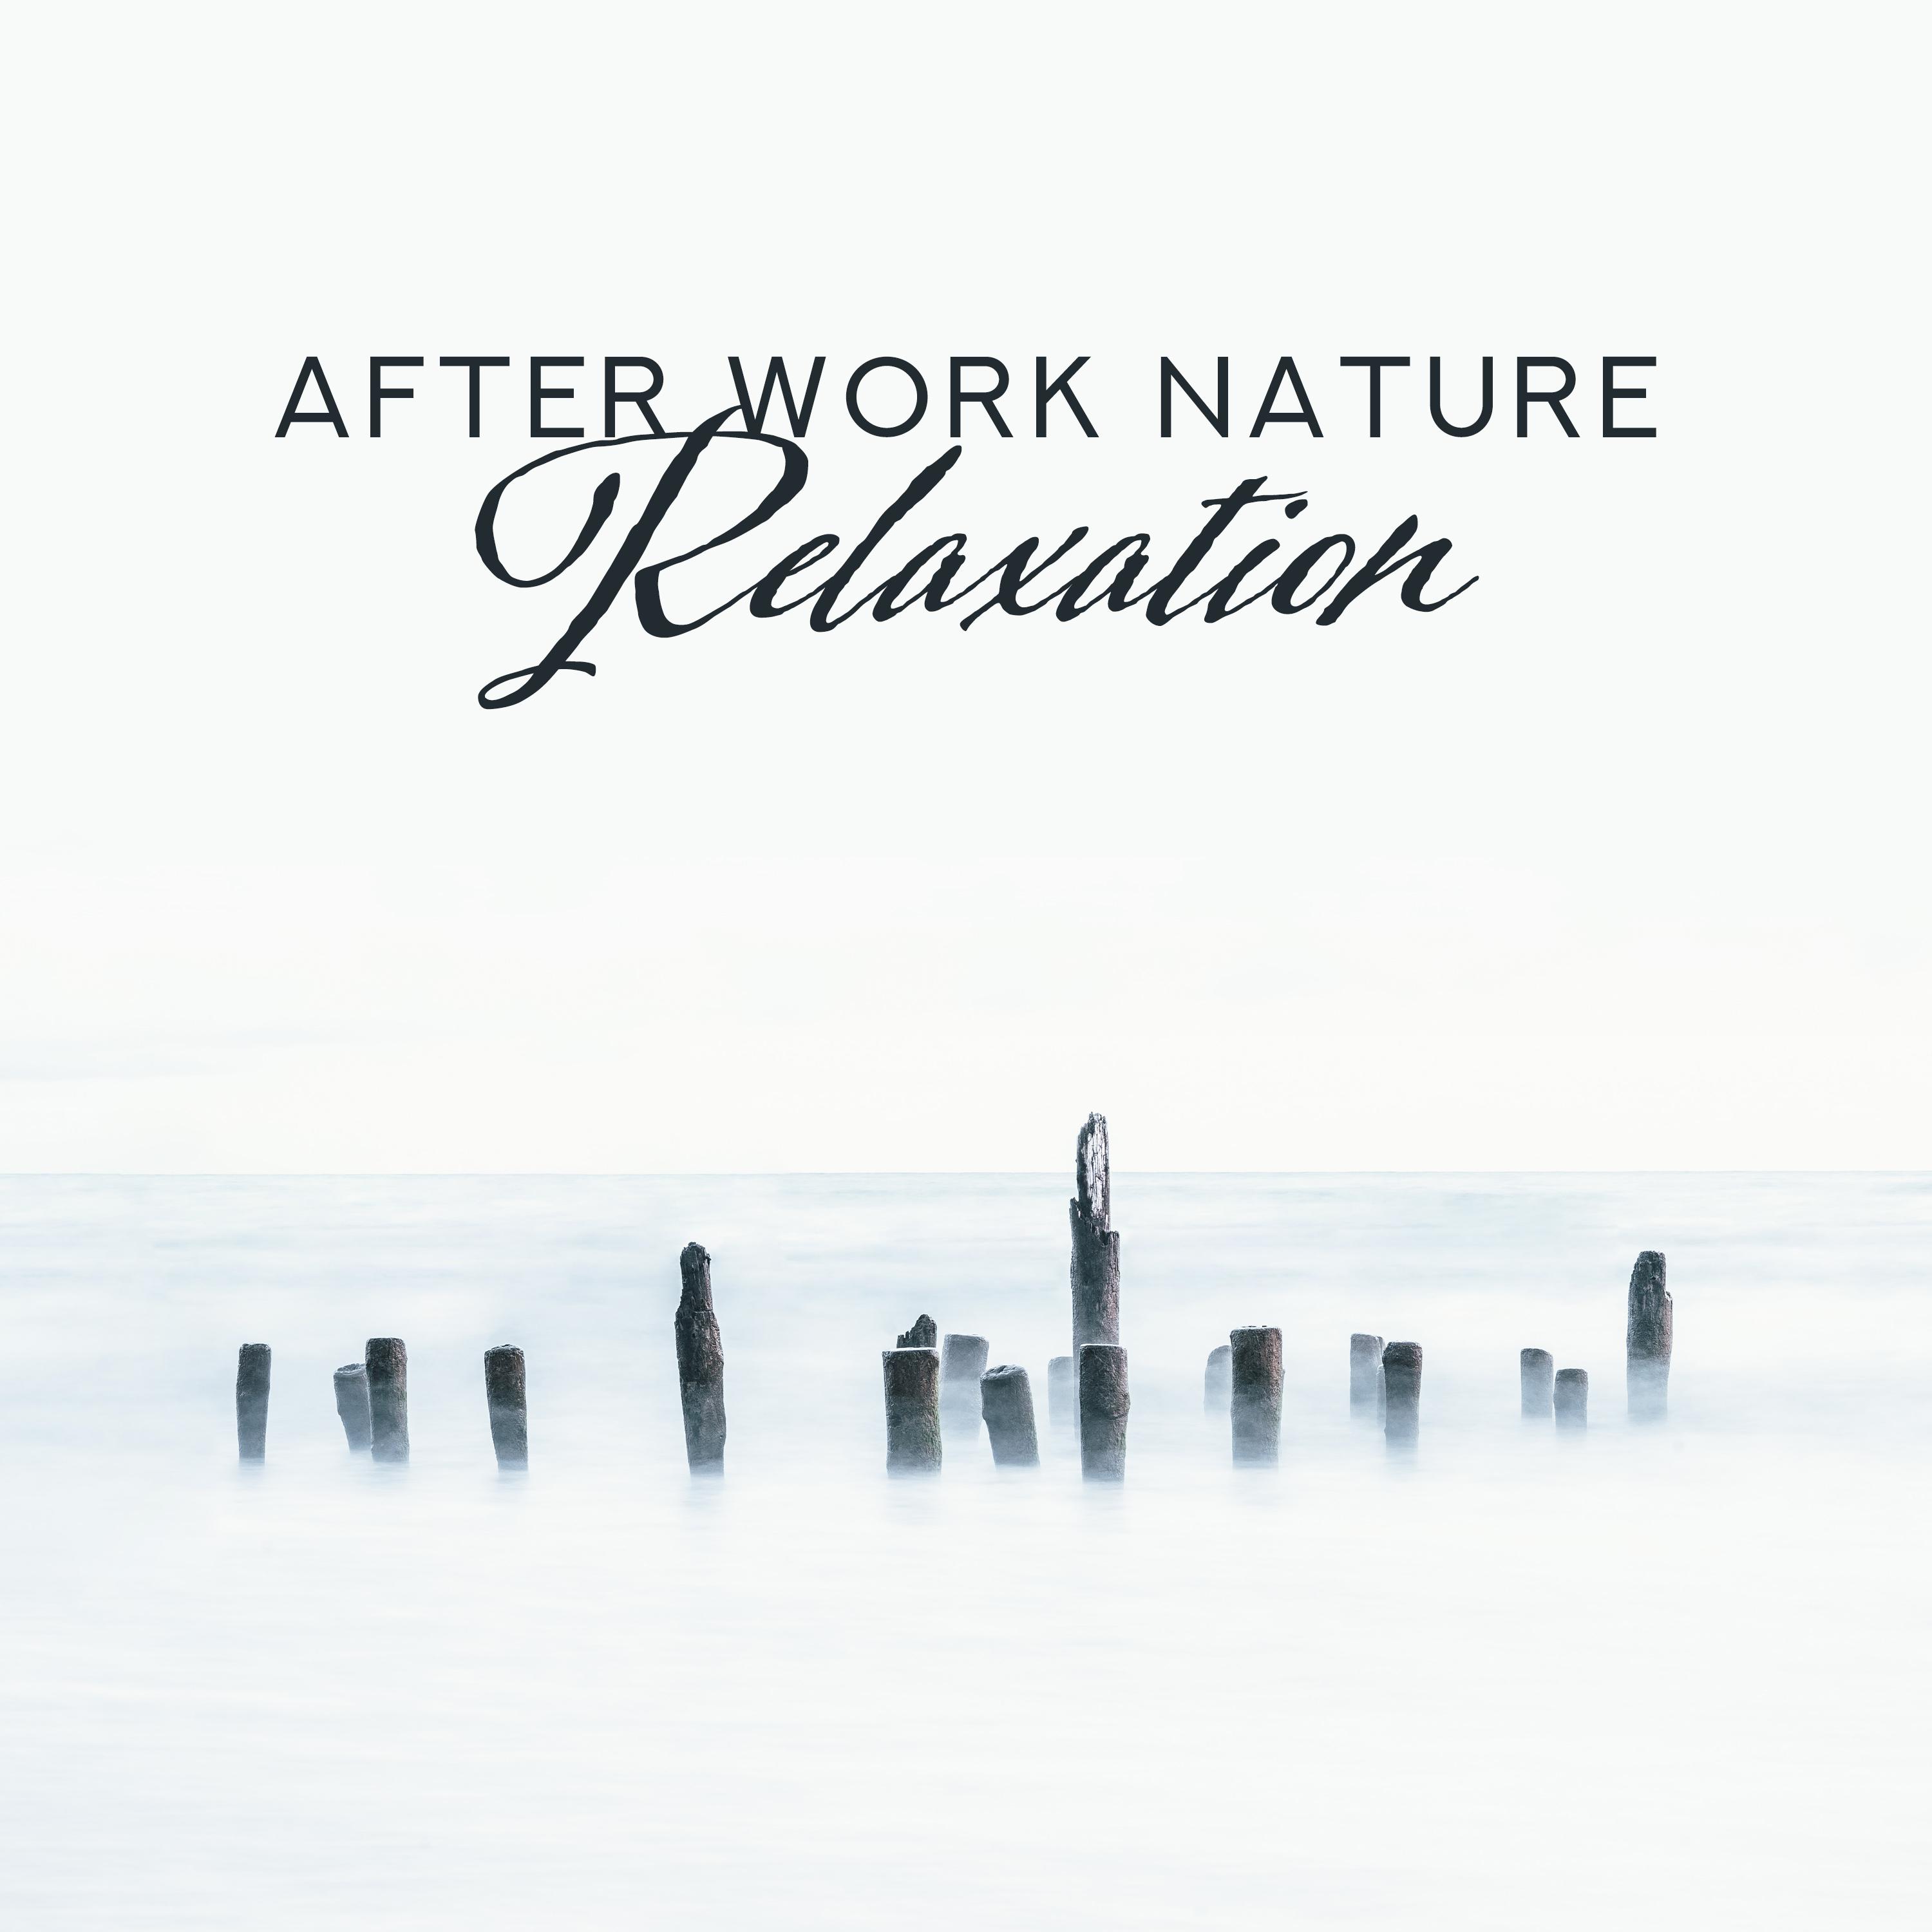 After Work Nature Relaxation: 2019 New Age Music to Calm Down, Relax & Full Rest, Nature Sounds of Water, Birds, Forest & Other, Beautiful Soothing Melodies Played on Piano & Guitar